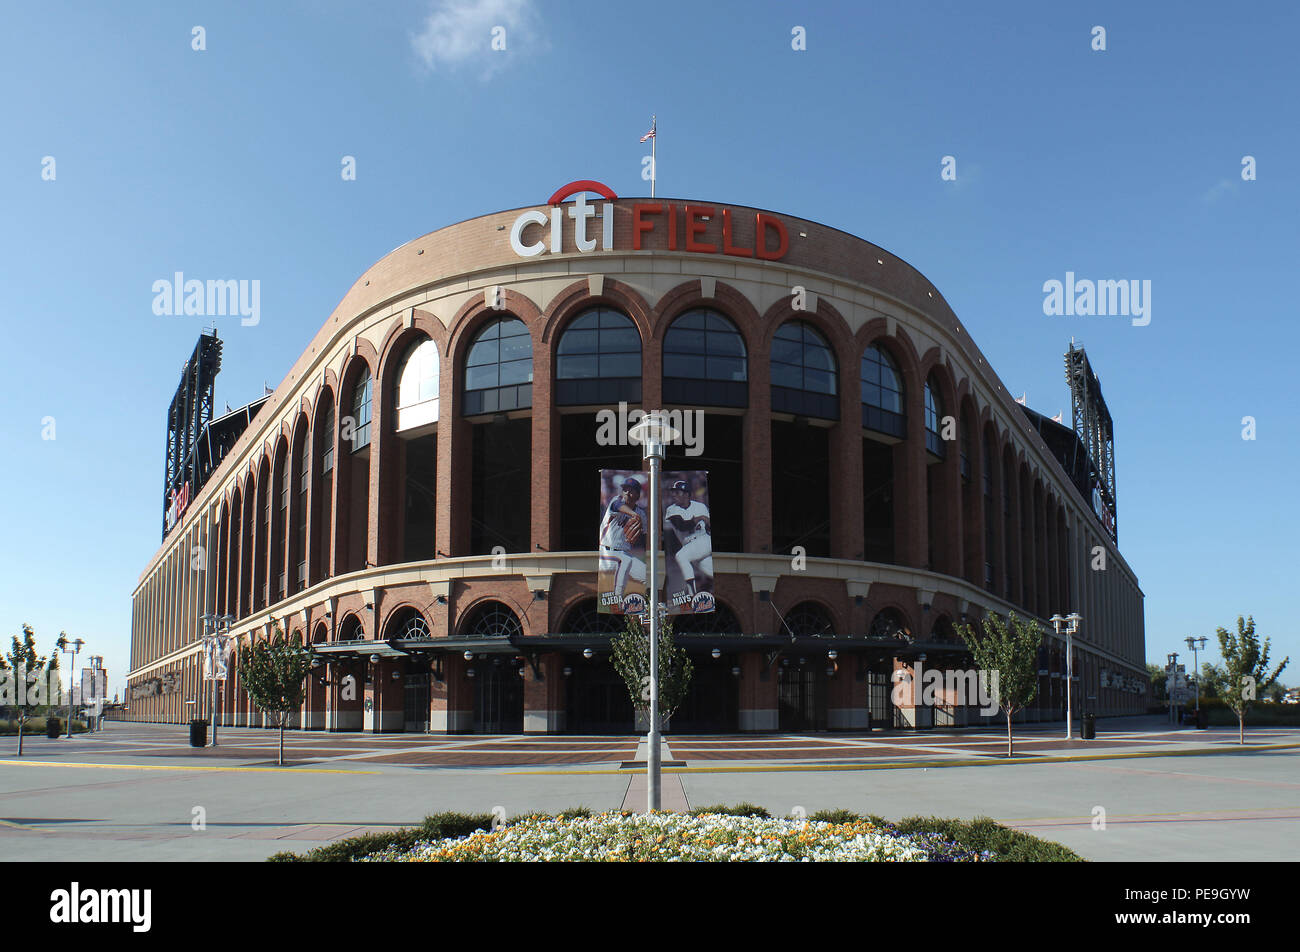 Mets Citifield Stadium NY NY Banque D'Images